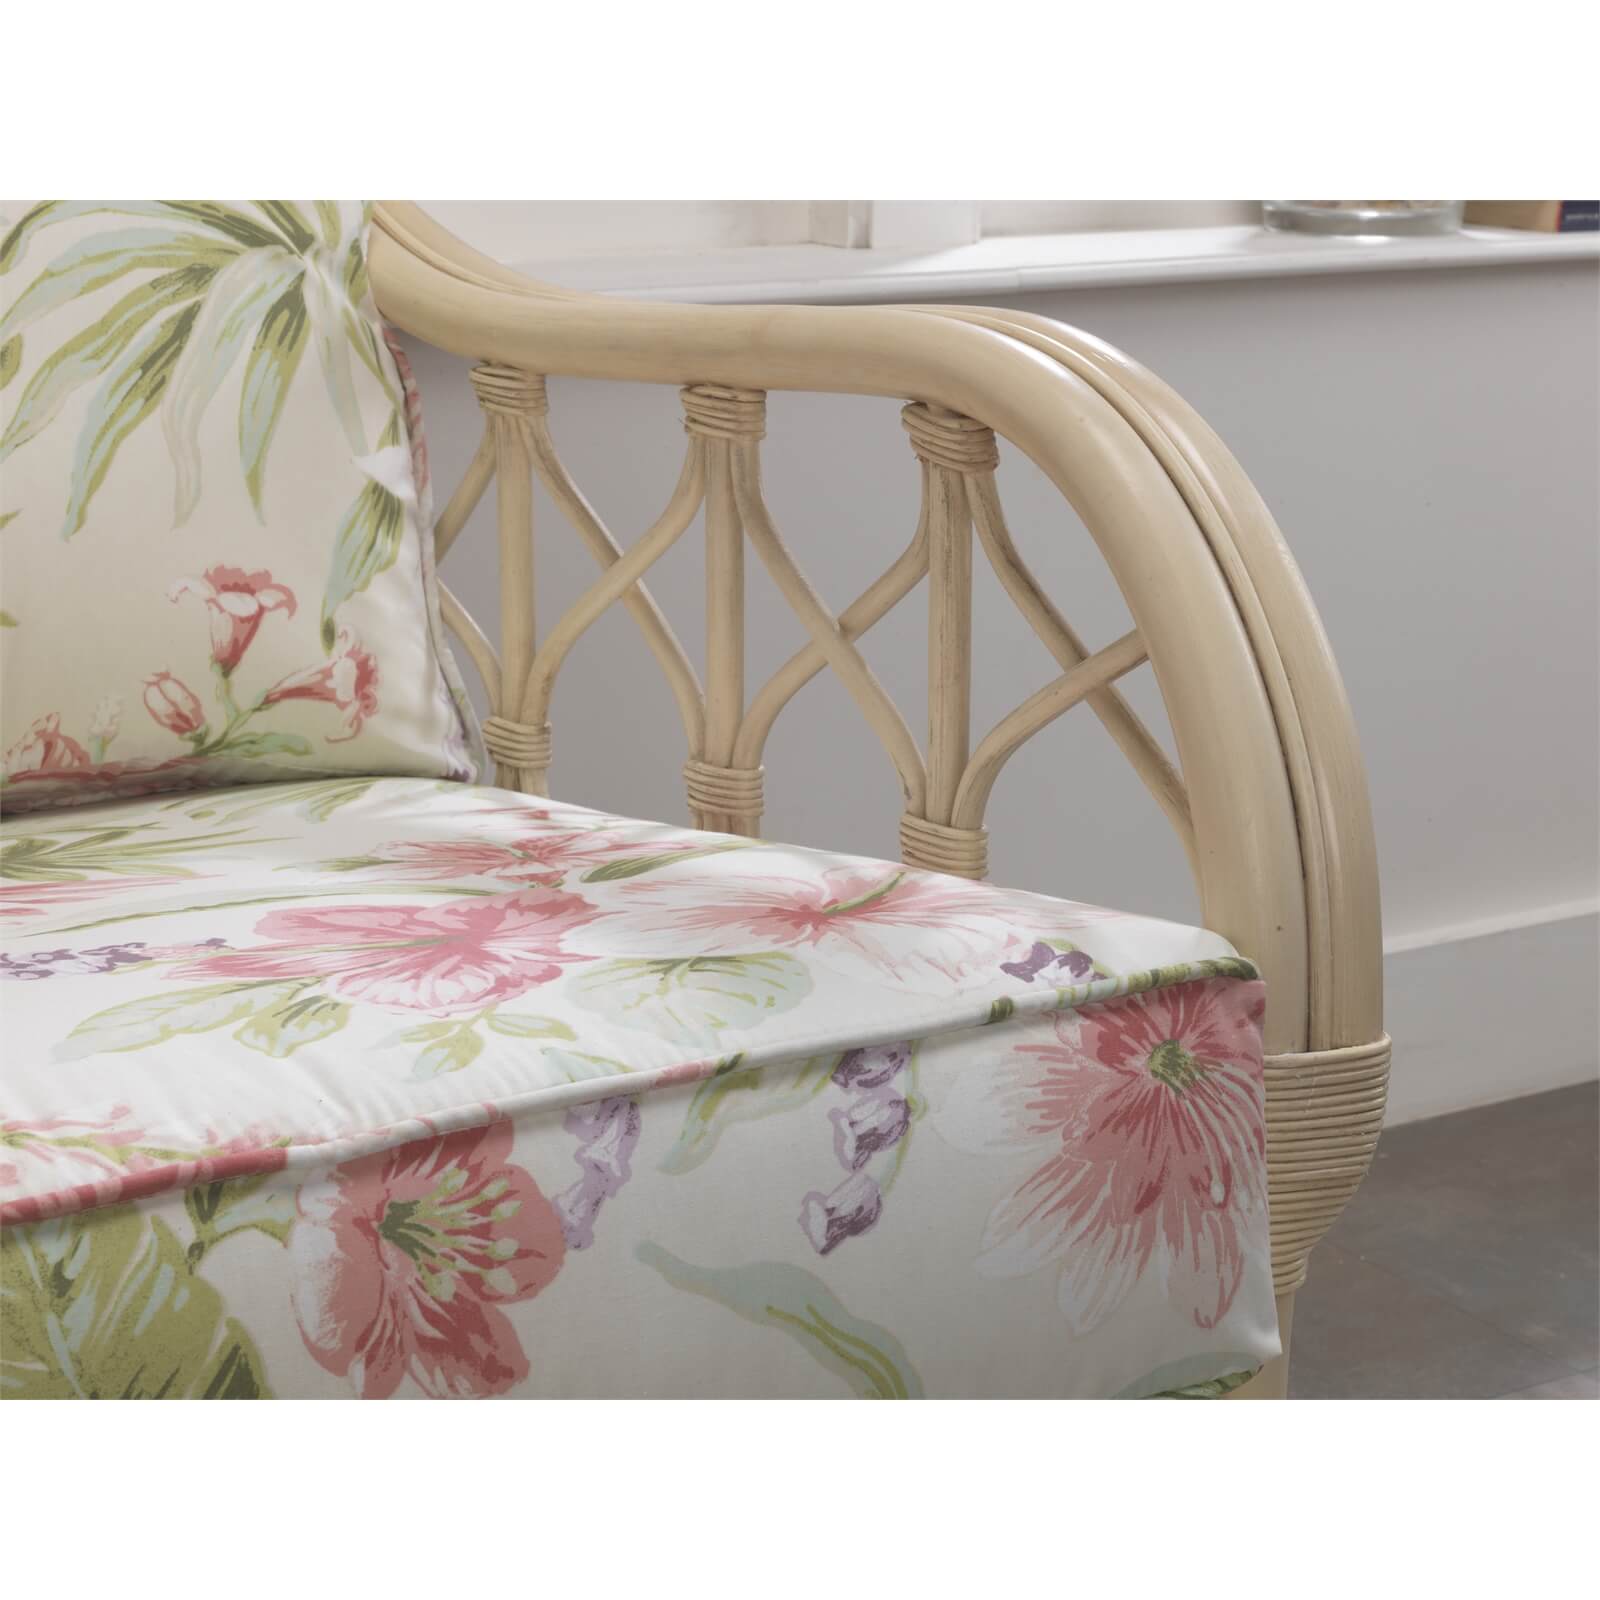 Morley Armchair In Blossom